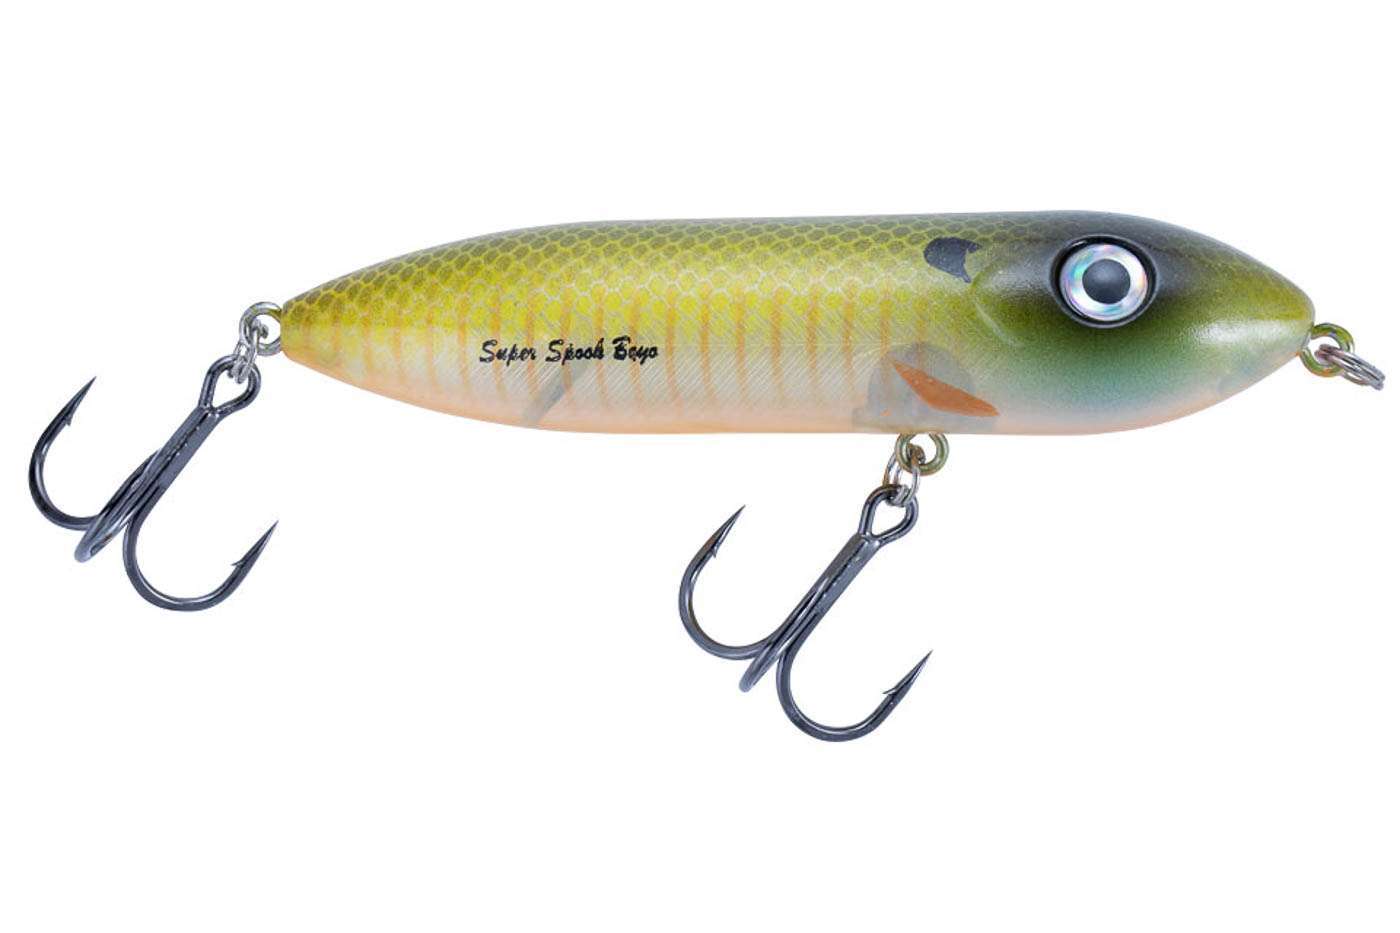 Newest Spook combines small size and big features - Bassmaster